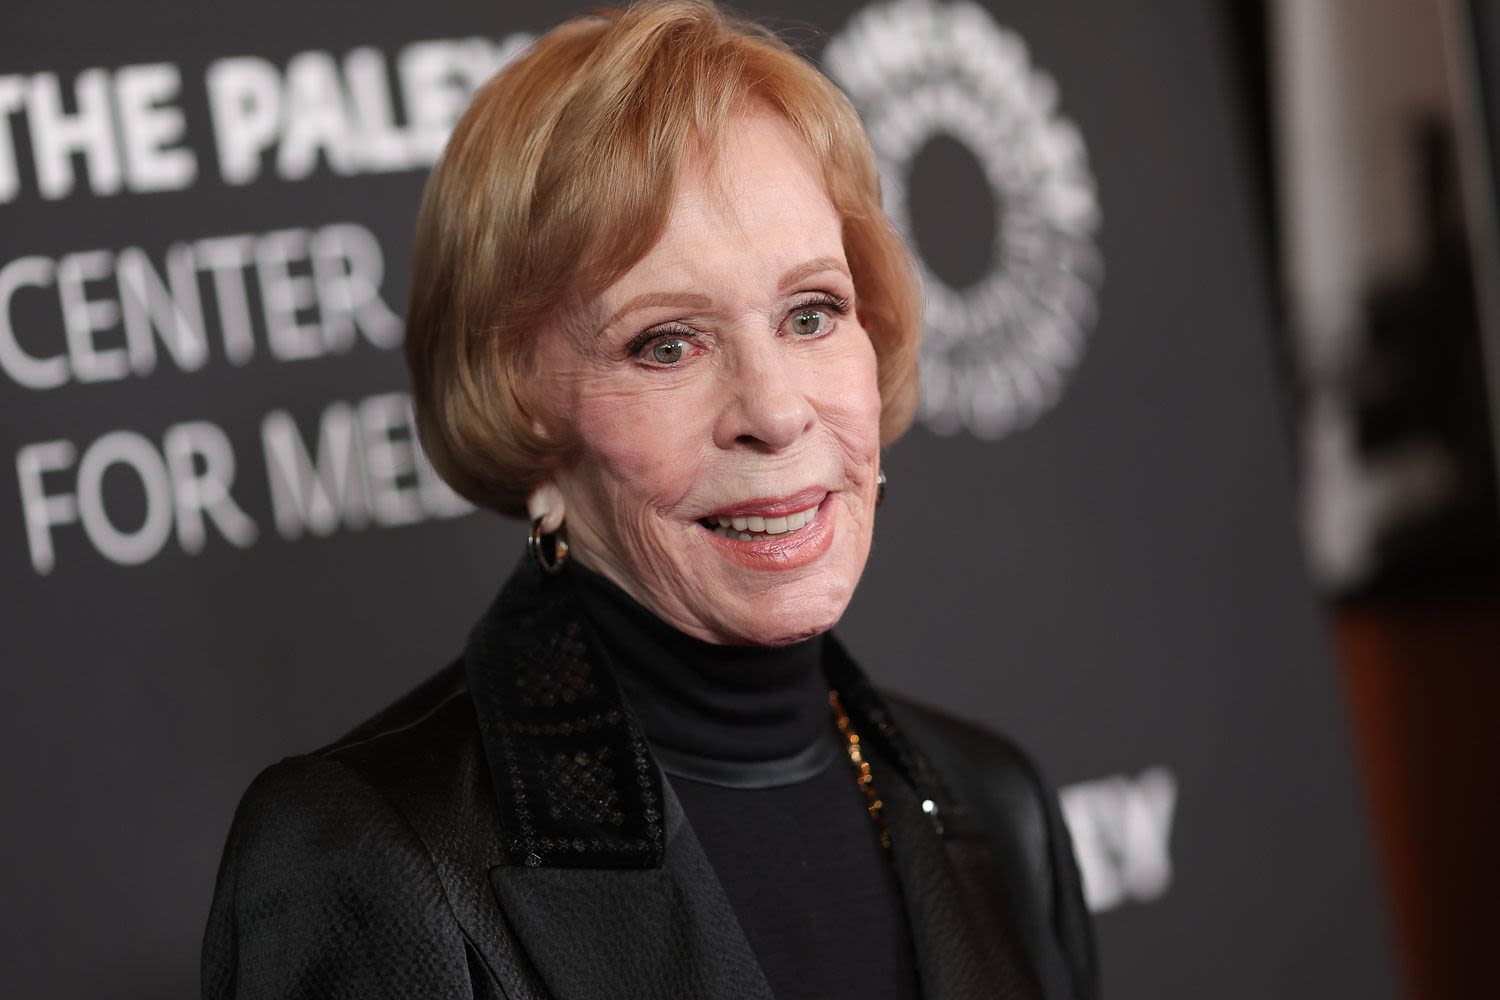 San Antonio Native Carol Burnett Just Made History With Her Emmy Nomination For 'Palm Royale'